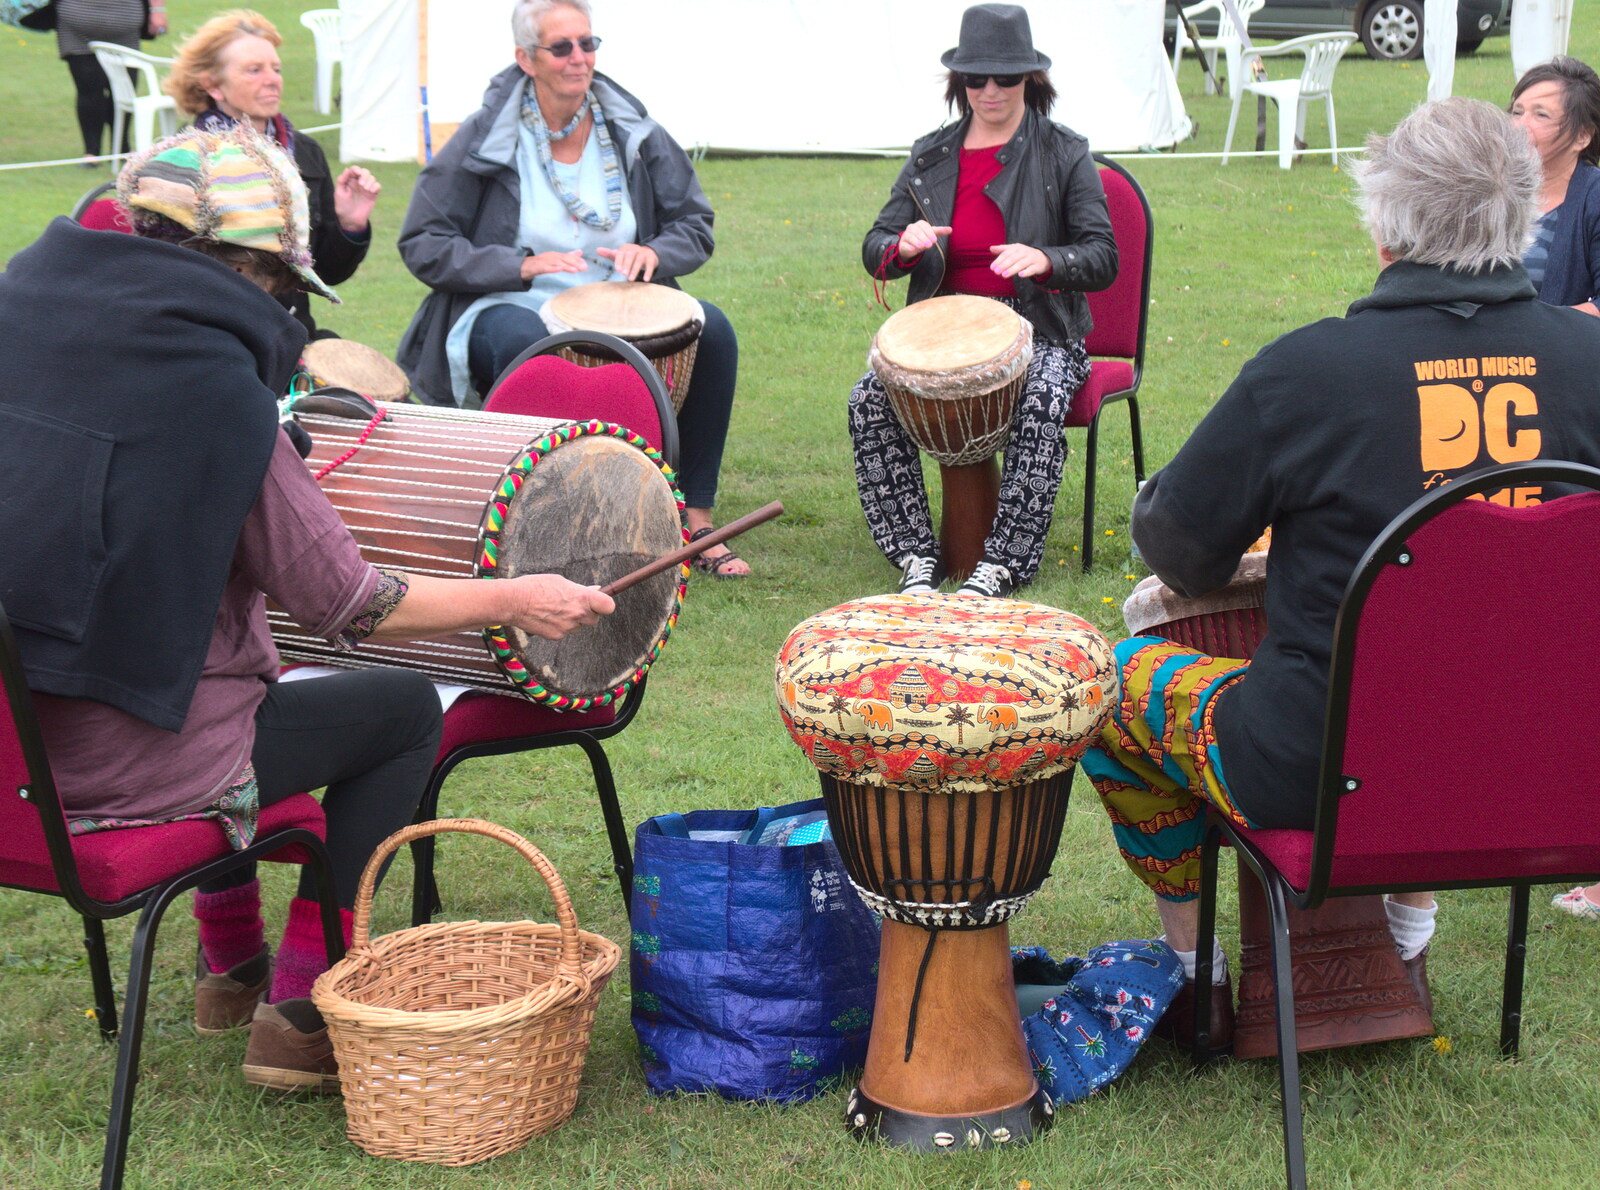 African drums from A Summer Fete, Palgrave, Suffolk - 10th September 2017